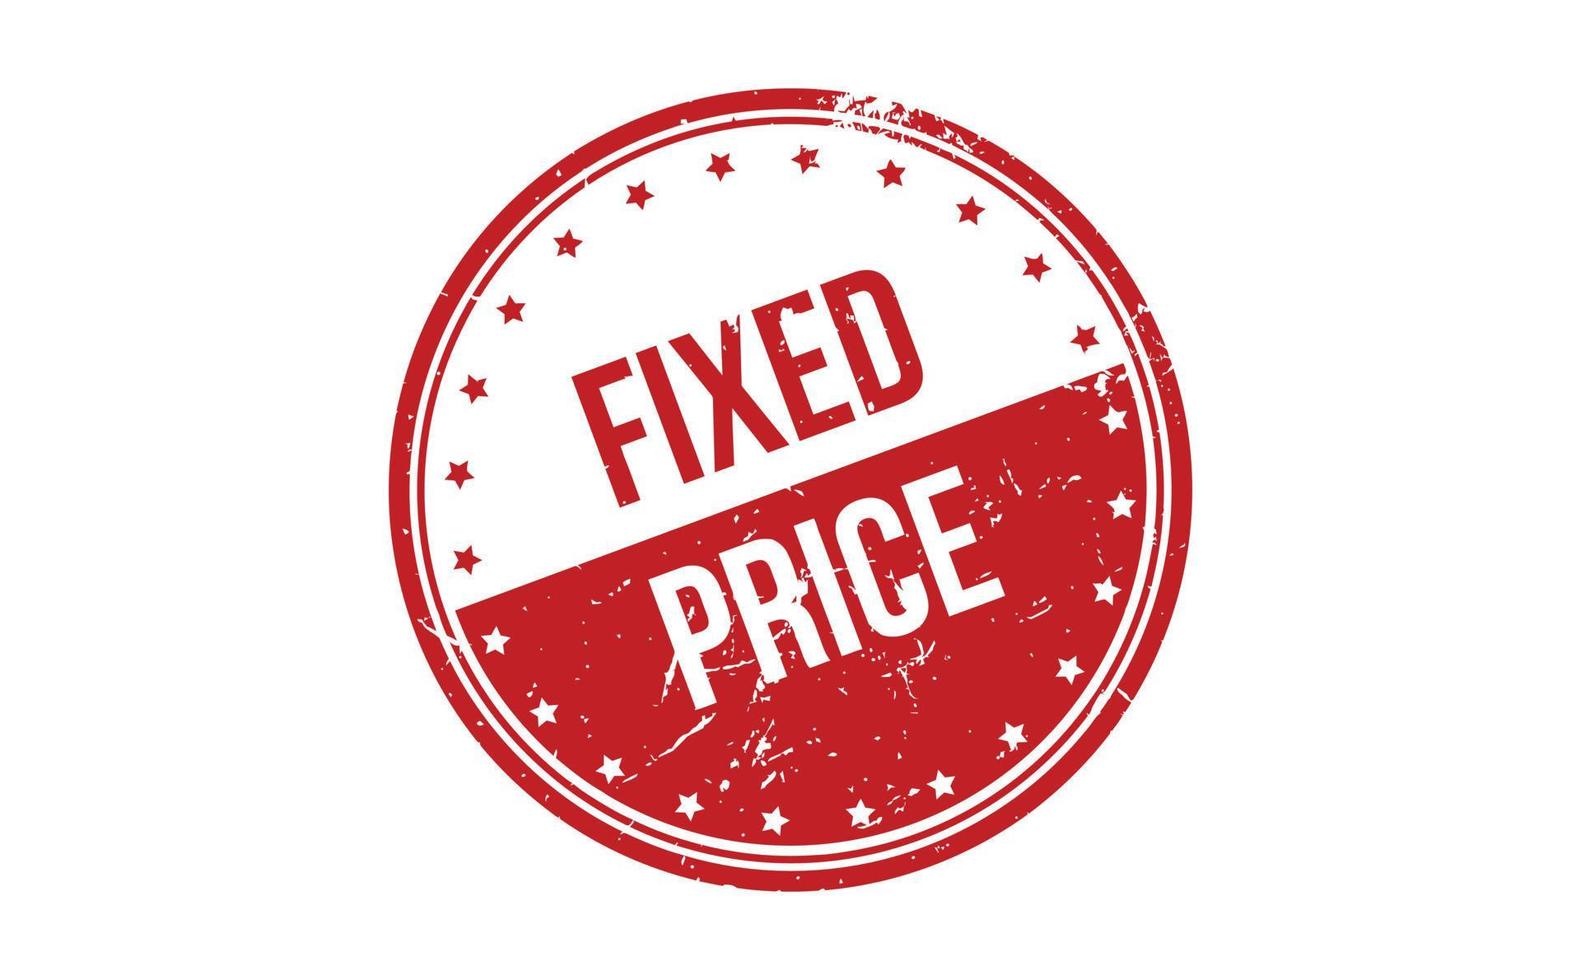 Fixed price Rubber Stamp. Red Fixed price Rubber Grunge Stamp Seal Vector Illustration - Vector